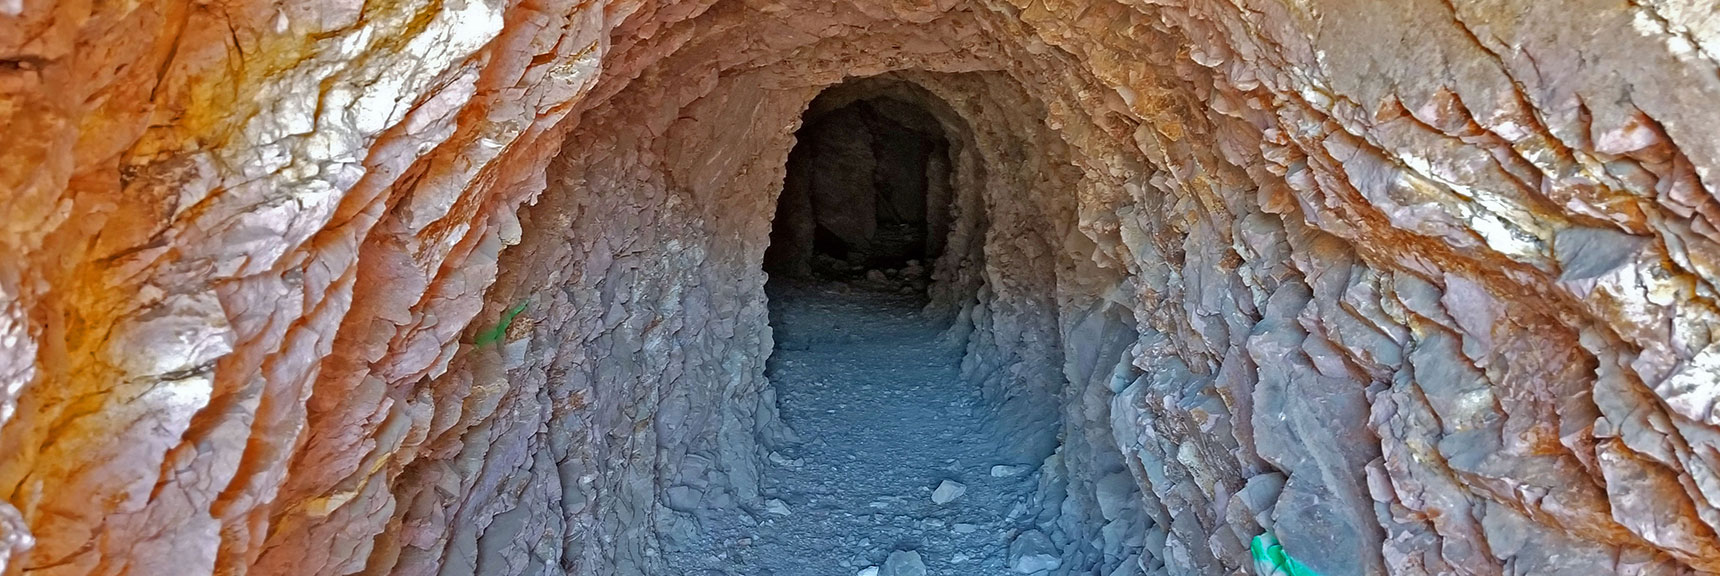 Mine Opening in a Hill Above Rhyolite | Rhyolite Ghost Town | Death Valley Area, Nevada